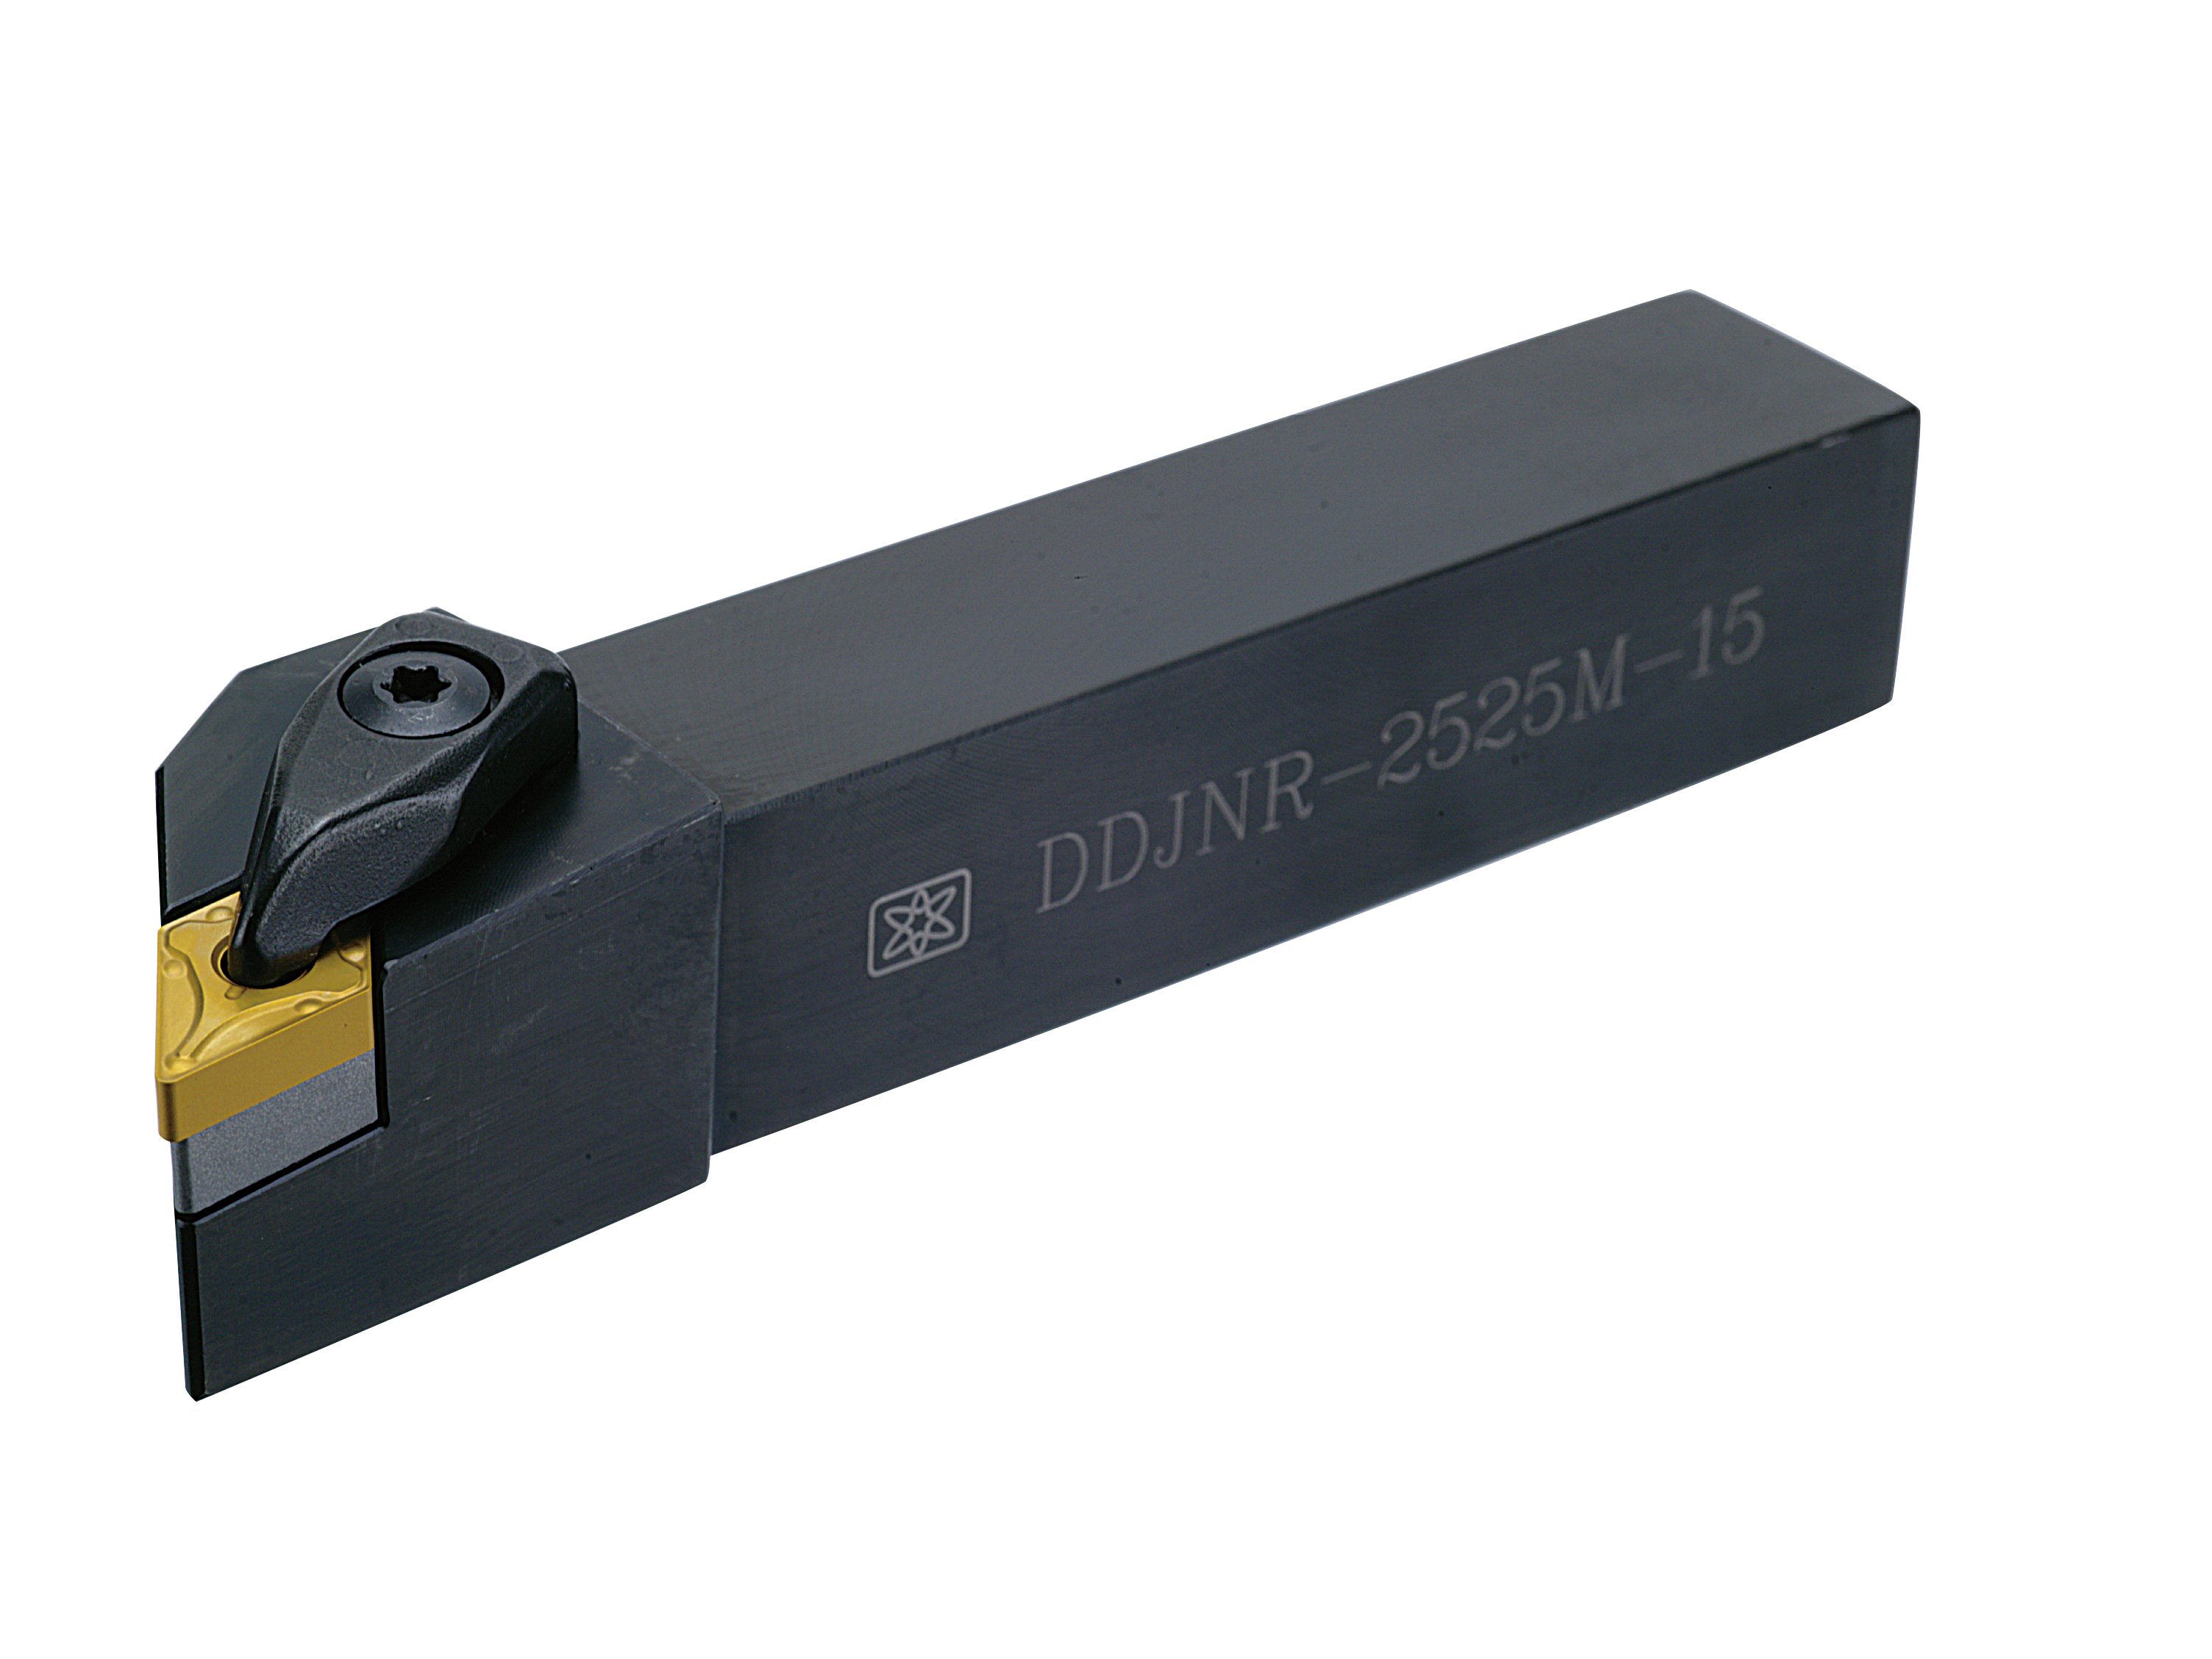 Products|DDJNR (DNMG1504 / DNMG1506) External Turning Tool Holder